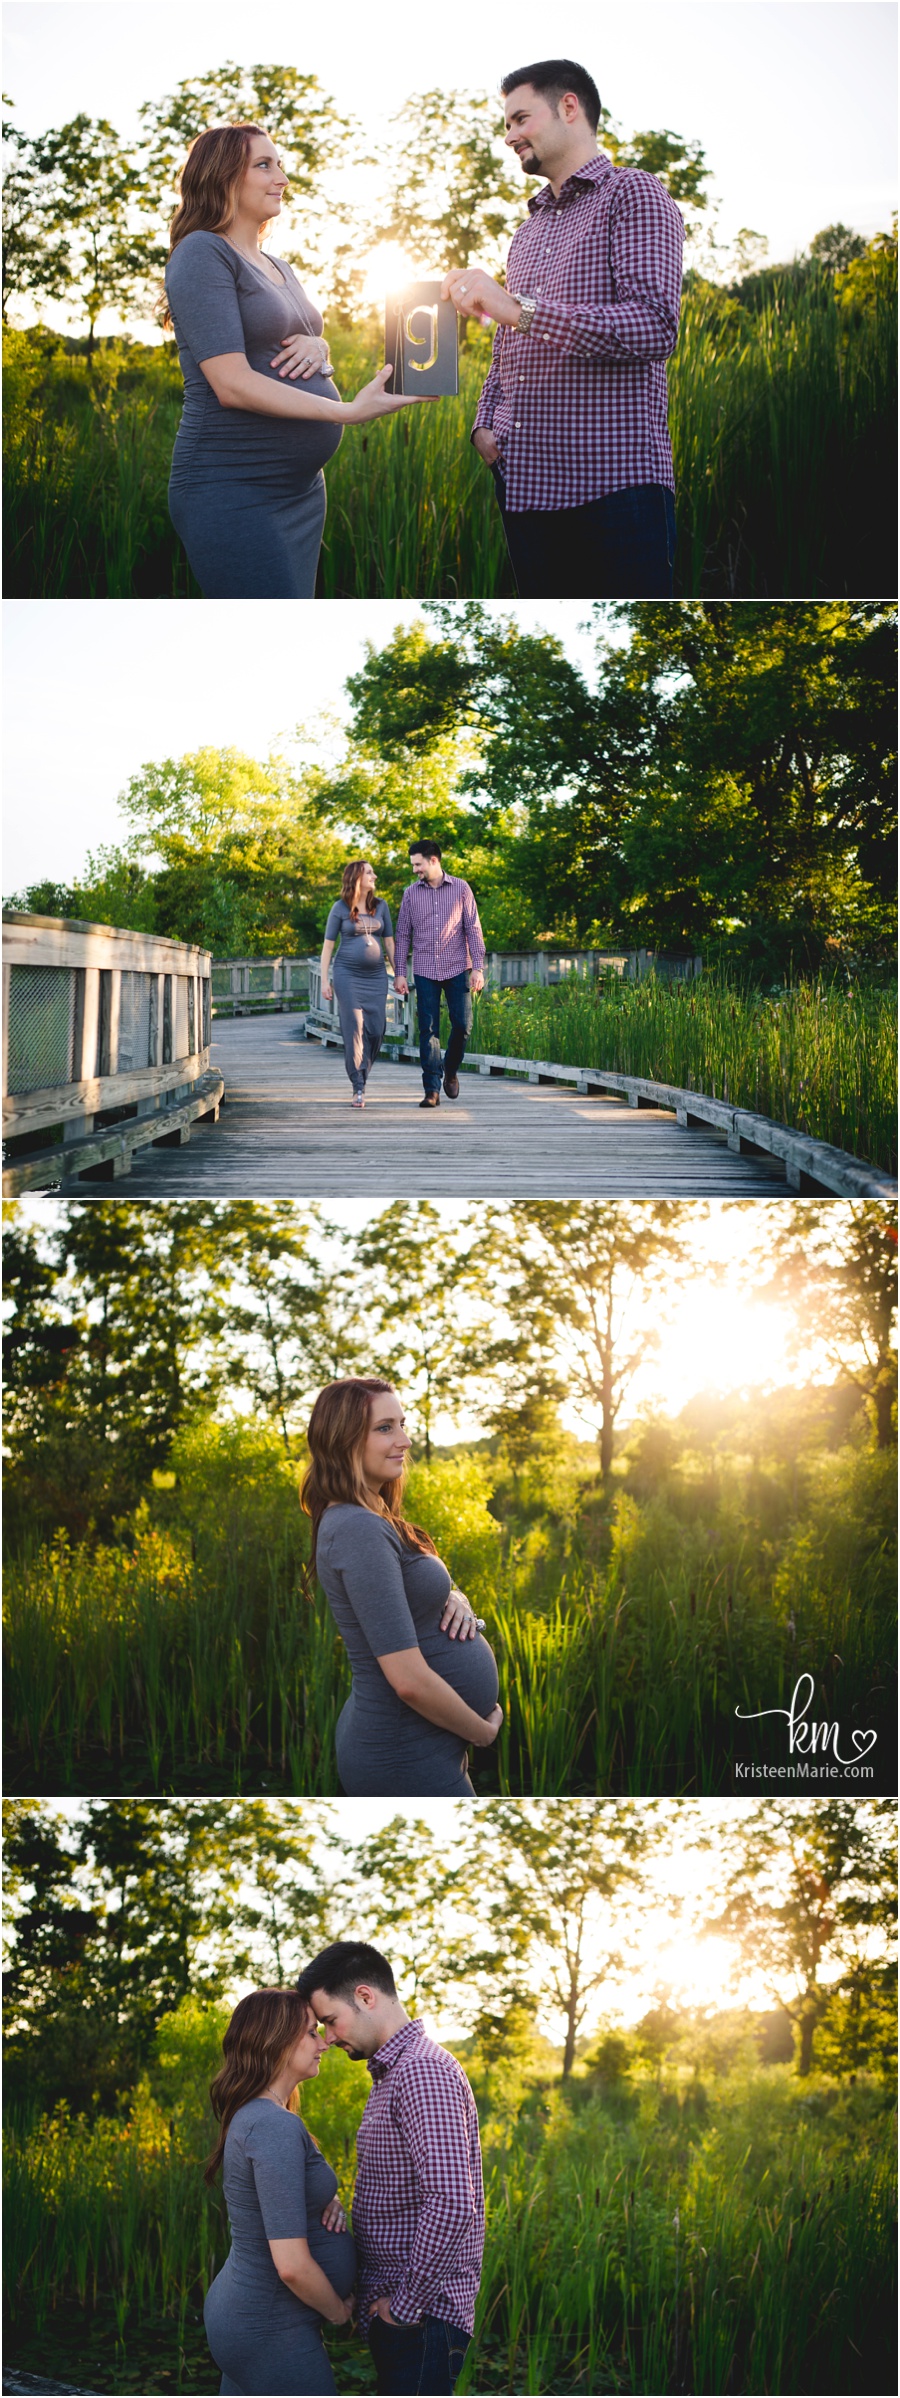 stunning sunset maternity images - KristeenMarie Photography